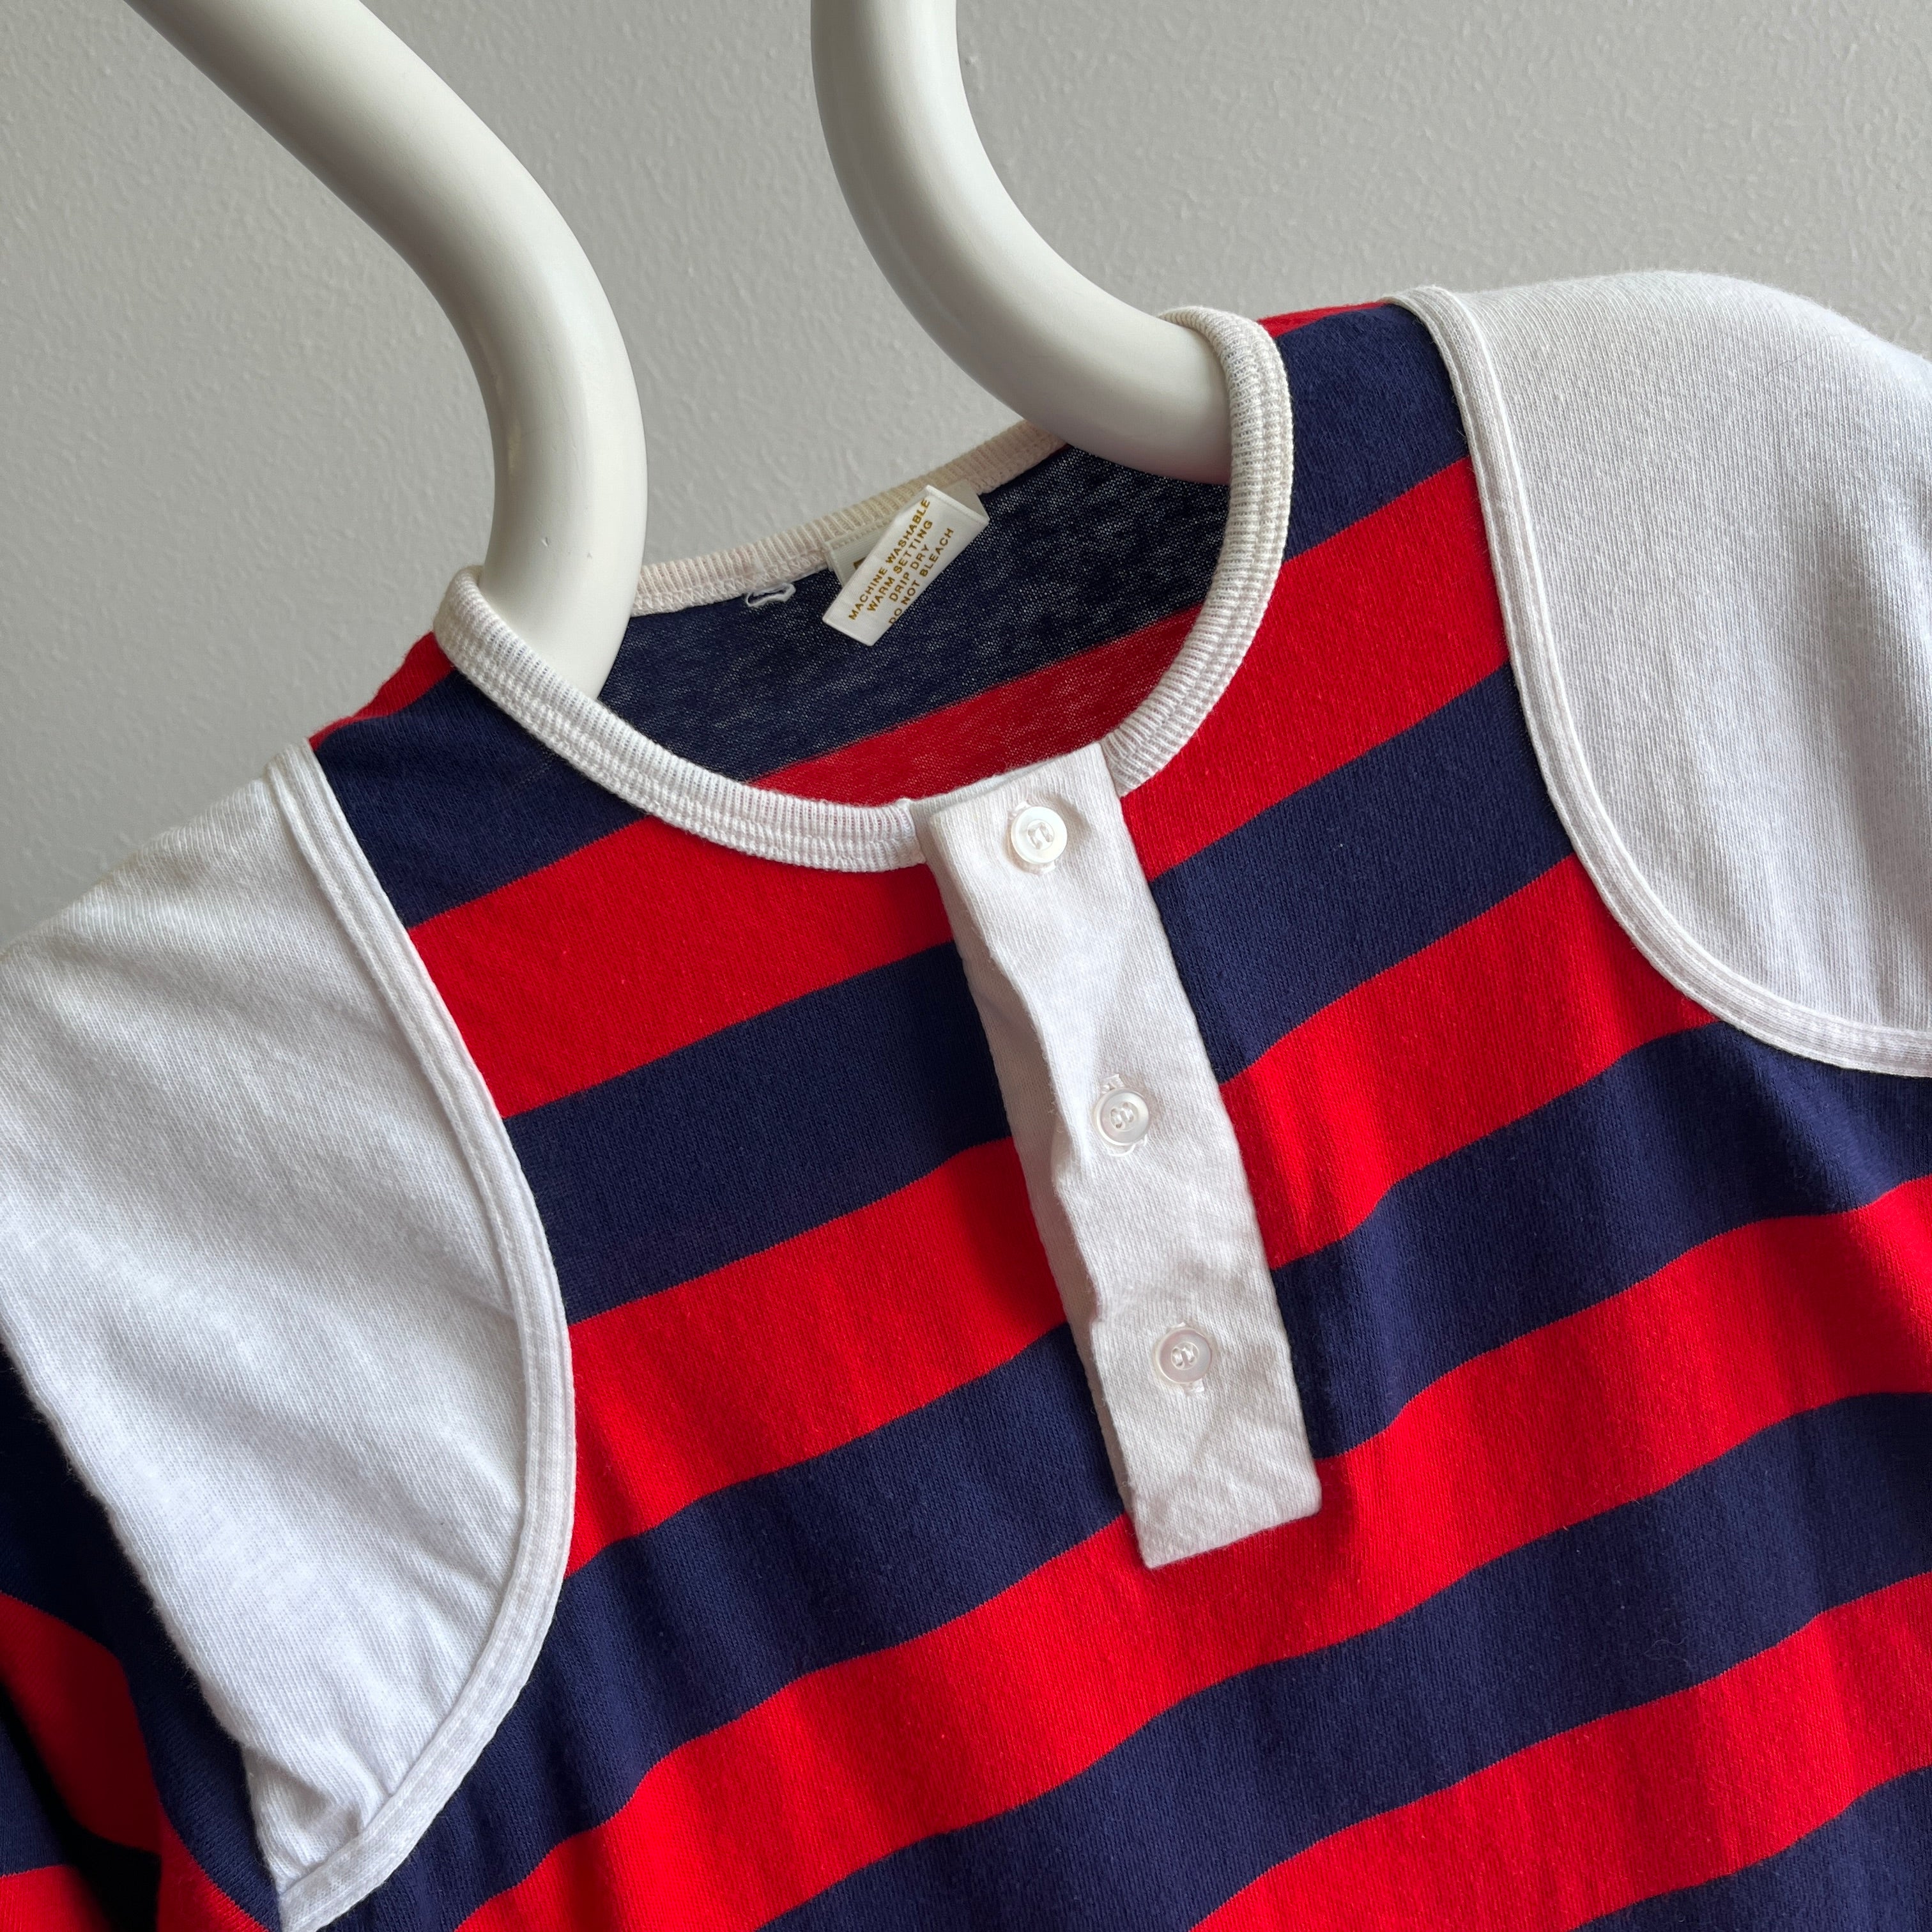 1980s Red and Navy Striped Henley T-Shirt with White SHoulder Patches - !!!!!